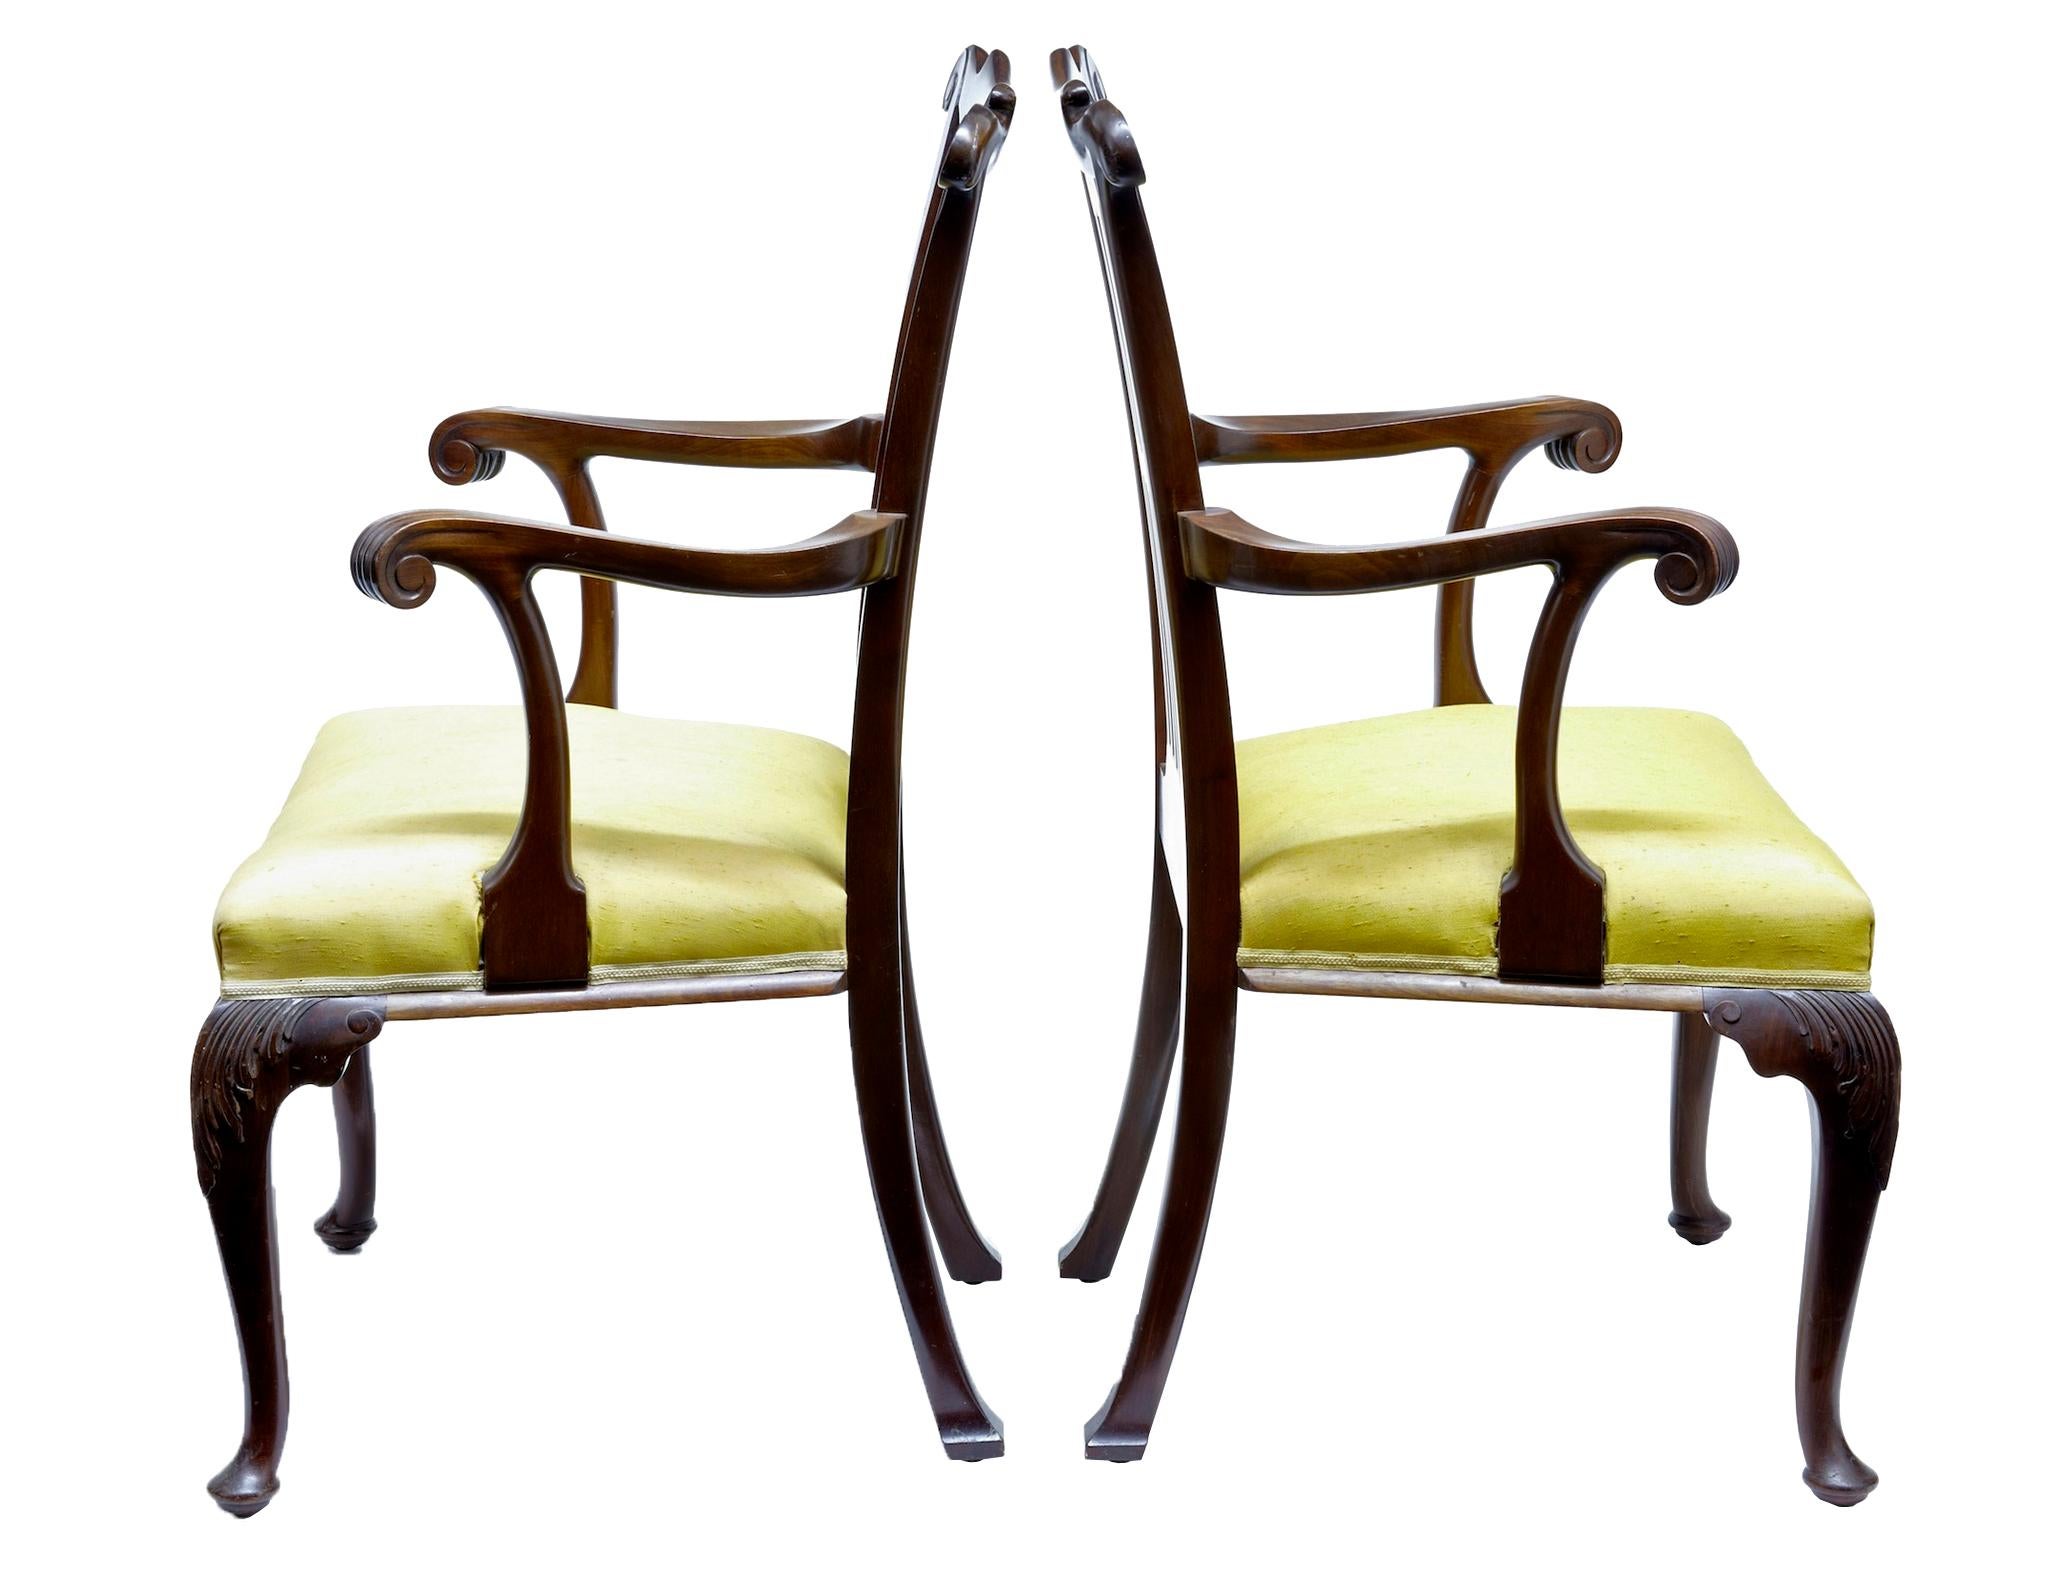 Elegant pair of mahogany armchairs strongly influenced by chippendale design, circa 1890.

Shaped backs with carved scrolling arms. Acanthus leaf detail to the knee, and carved rail. Standing on front pad foot.

Minor surface marks from